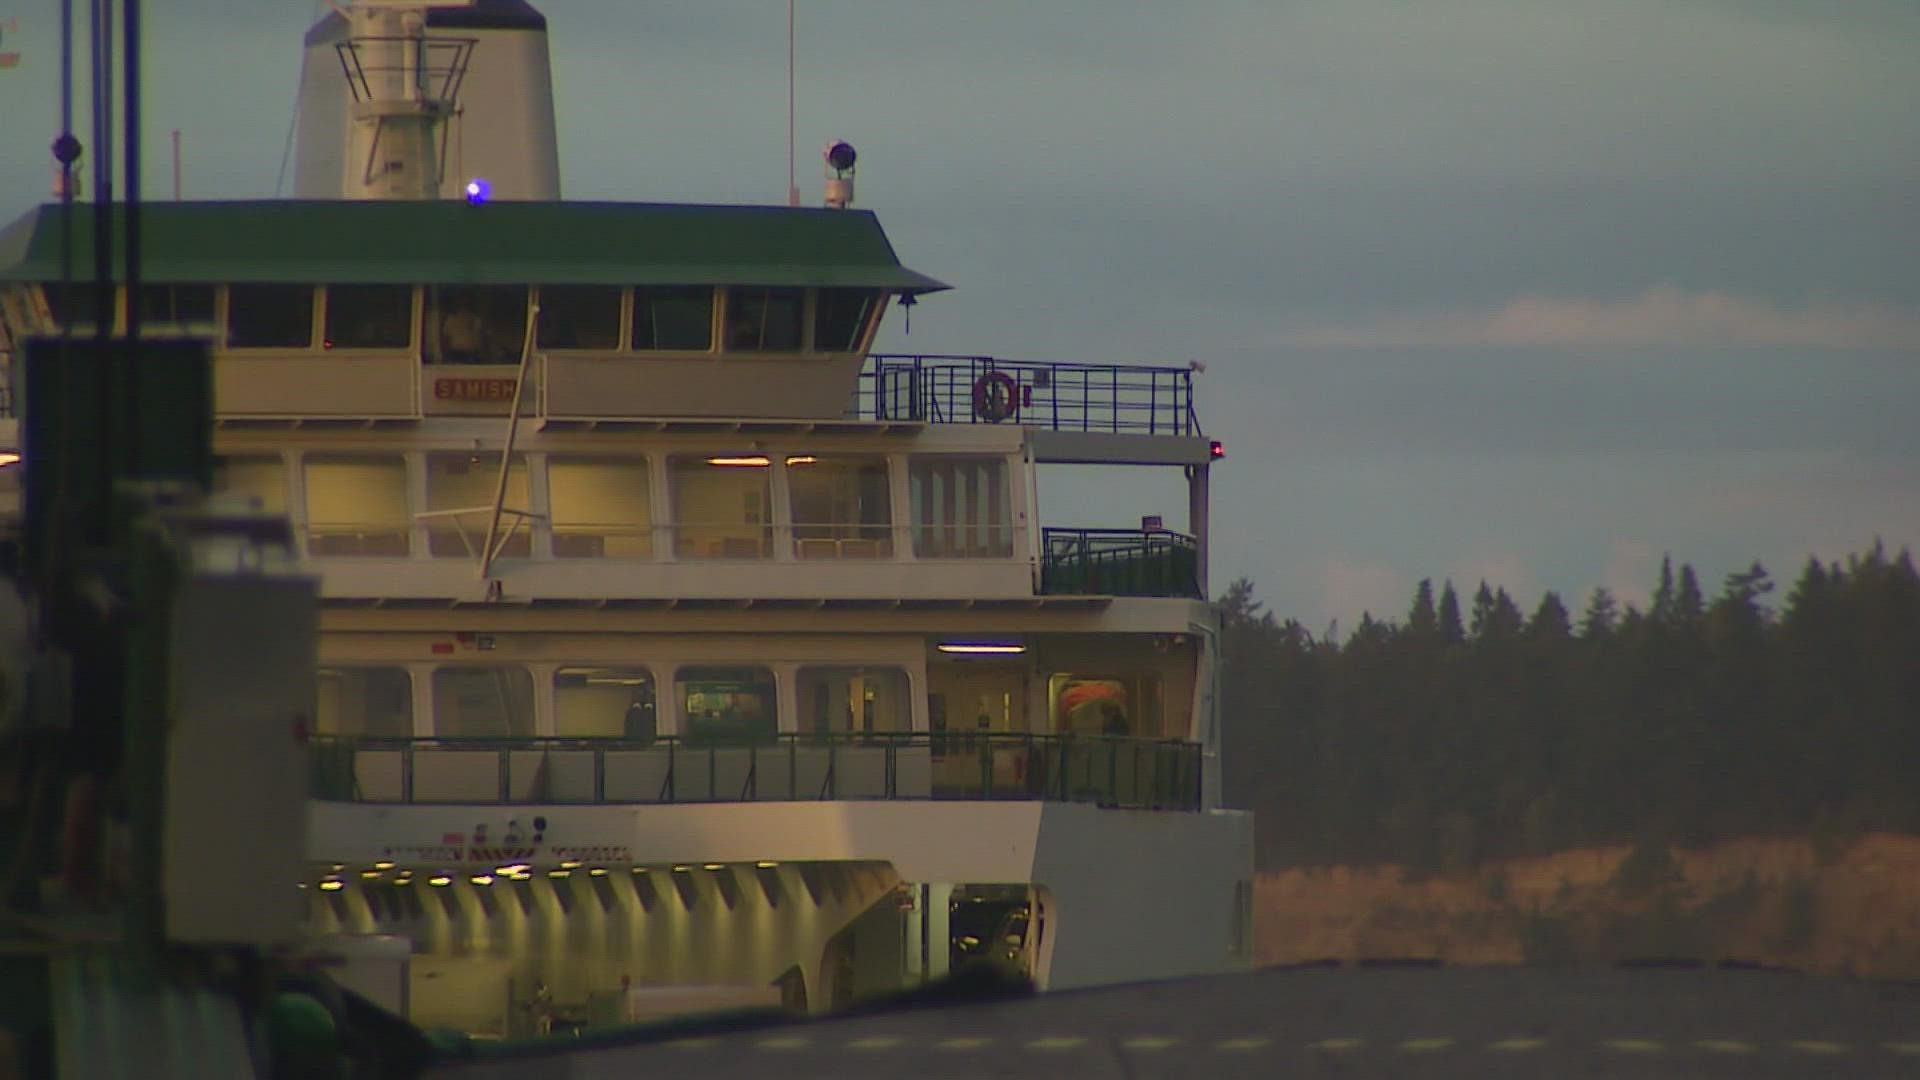 Residents who live on the San Juan Islands and rely on Washington State Ferries to make it to work and important appointments are frustrated with continued delays.